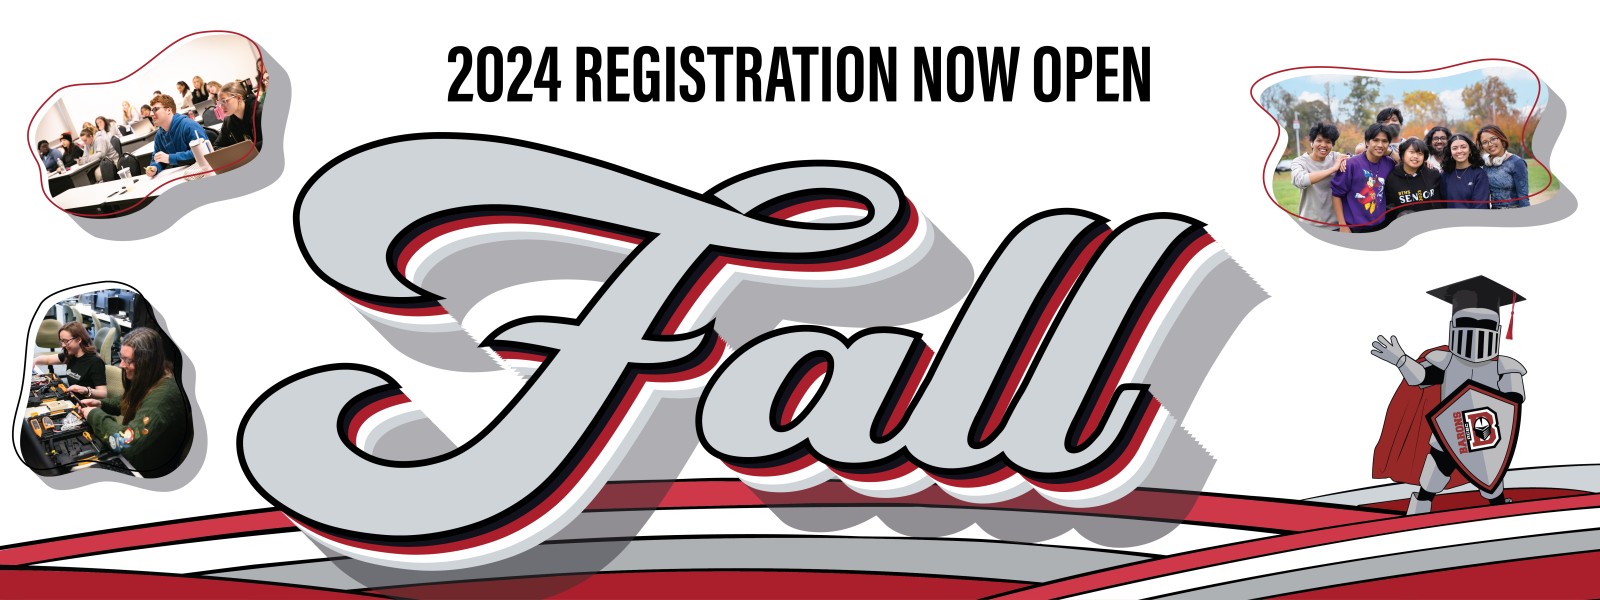 Fall 2024 Registration now Open graphic design